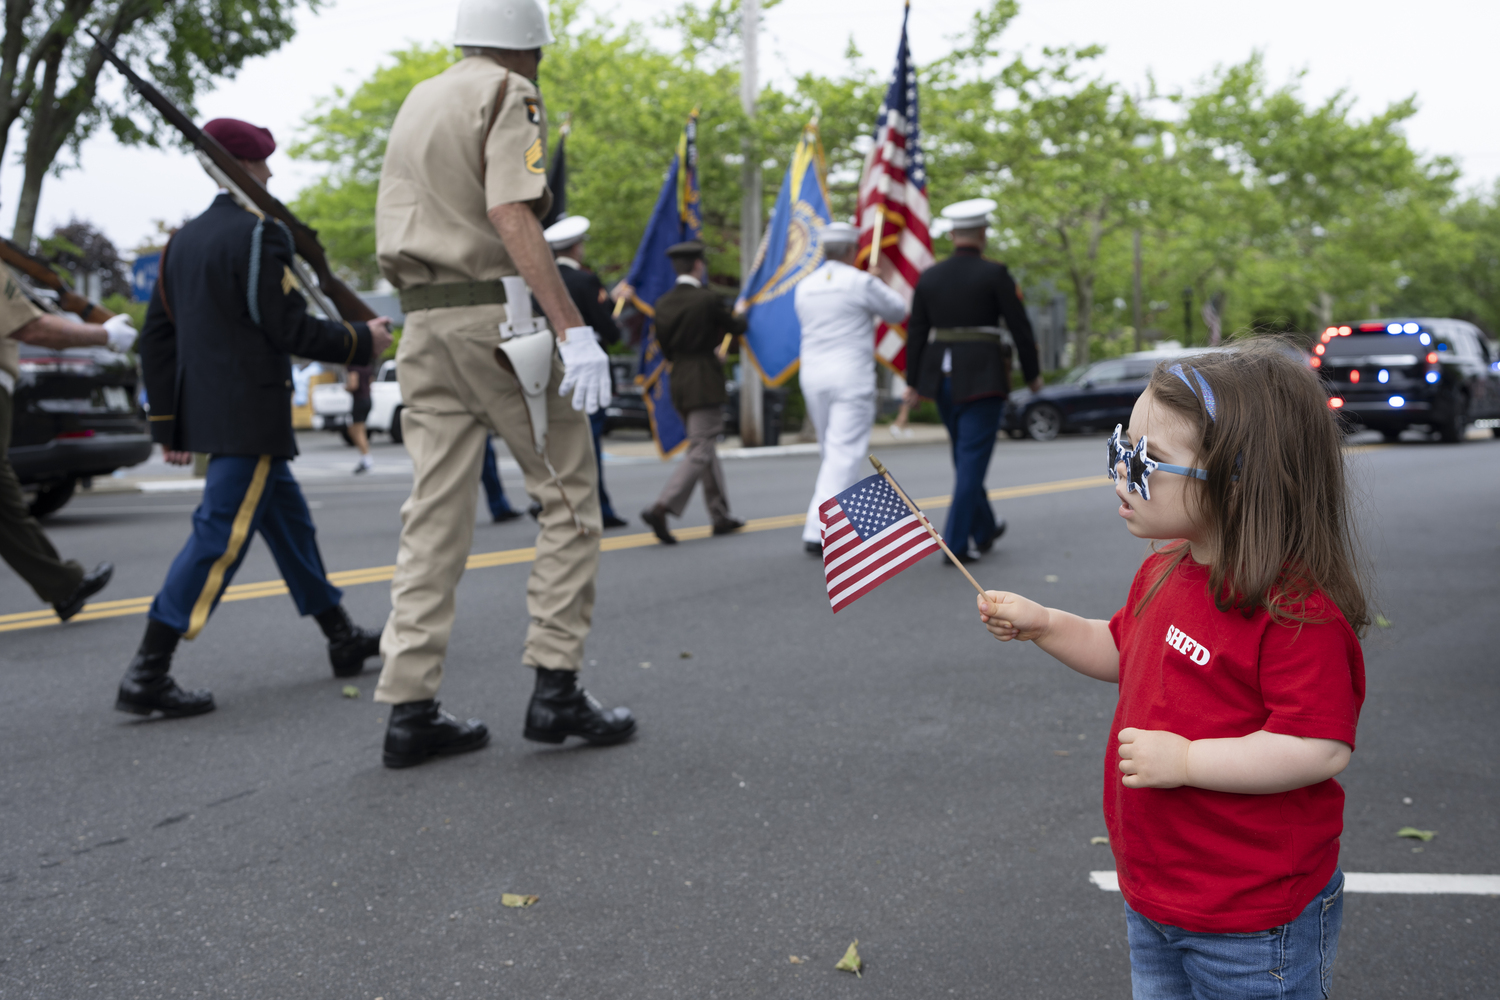 A young girl watches the Sag Harbor Memorial Day parade pass by. LORI HAWKINS